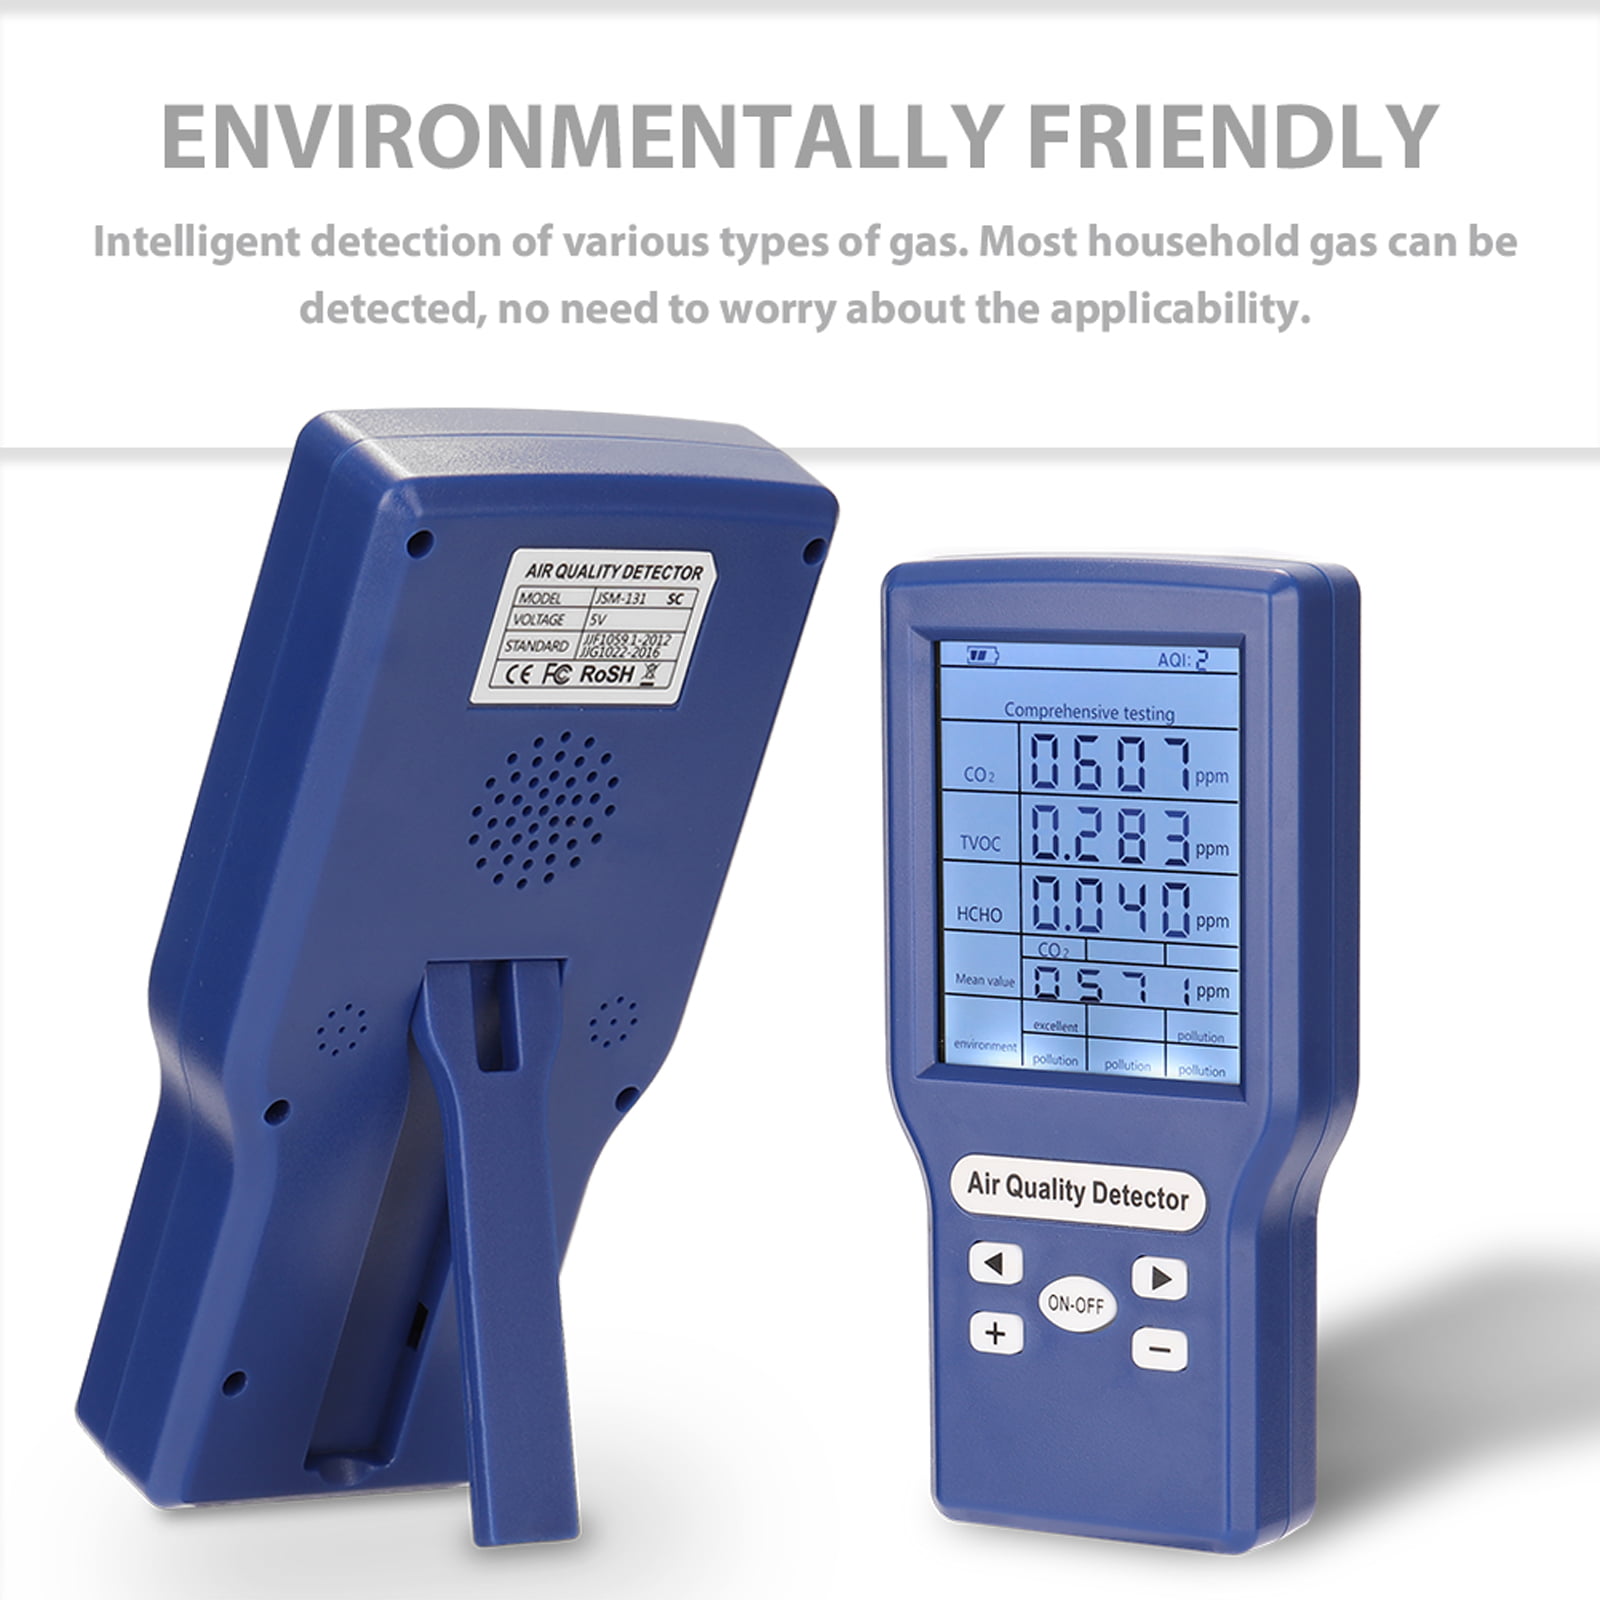 Festnight Multifunctional CO2 ppm Meters Mini Carbon Dioxide Detector Gas Analyzer Protable Air Quality Tester